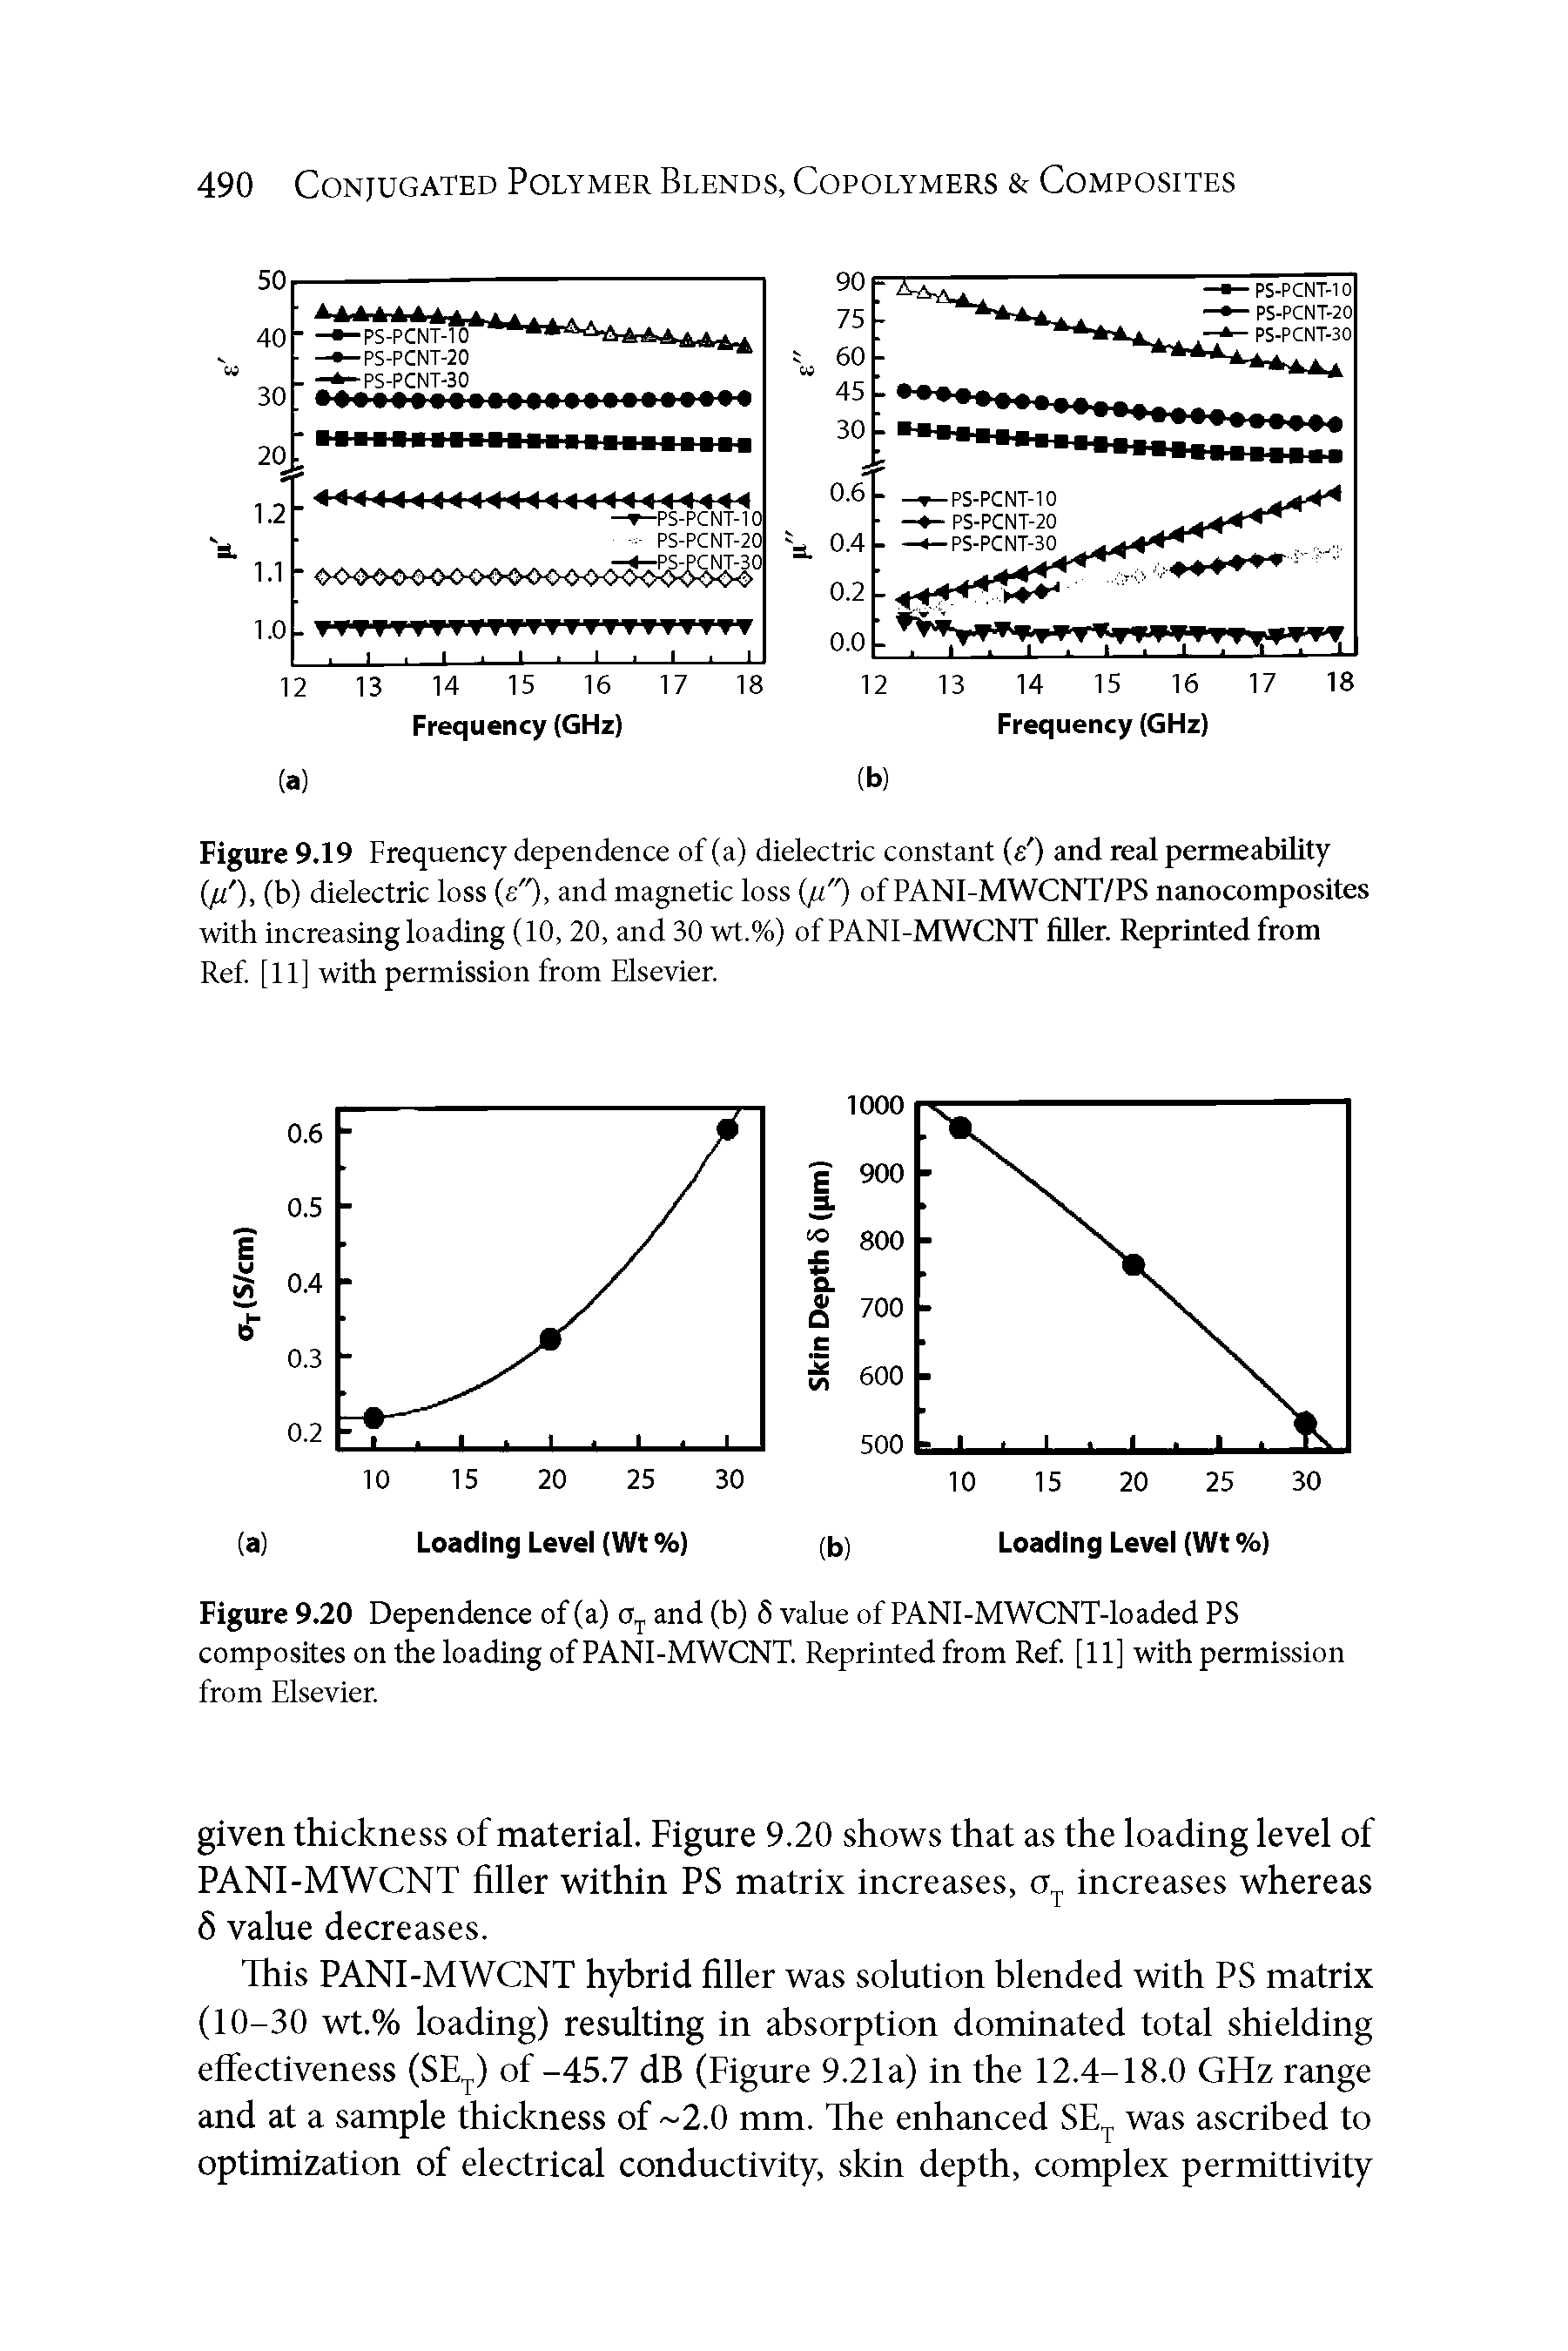 Figure 9.20 Dependence of (a) and (b) 6 value of PANl-MWCNT-loaded PS composites on the loading of PANl-MWCNT. Reprinted from Ref [11] with permission from Elsevier.